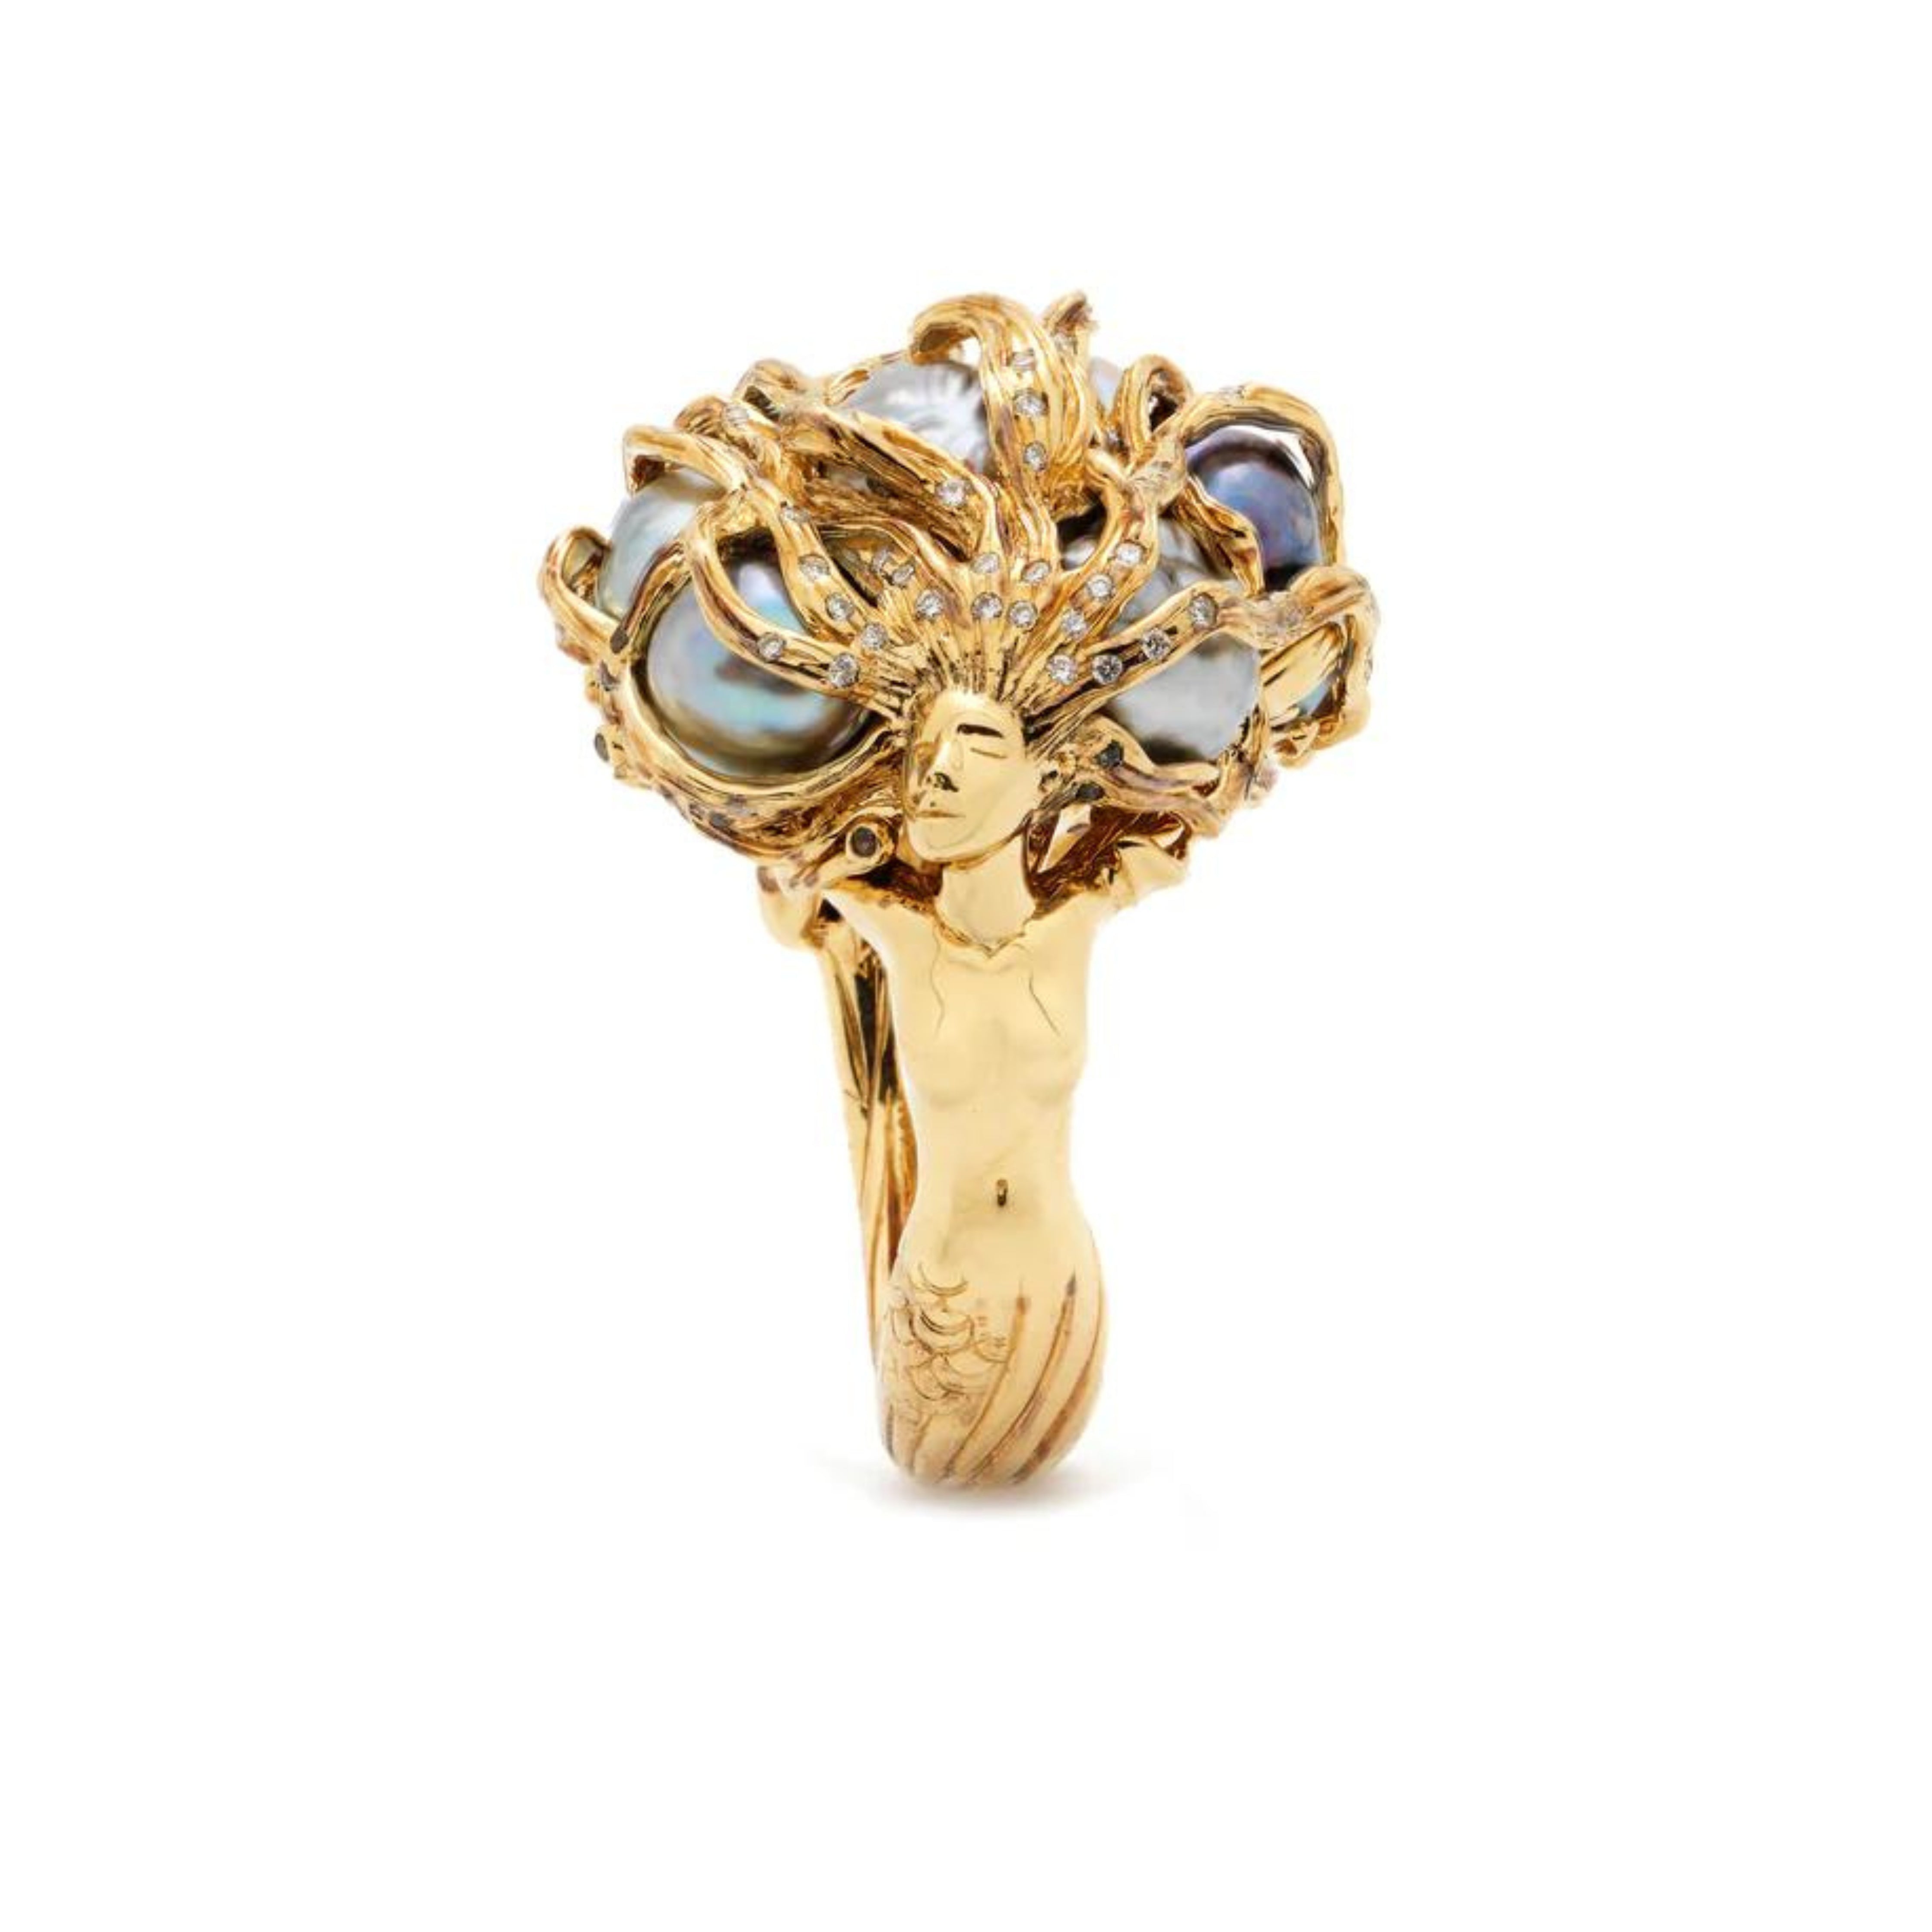 Bibi van der Velden, Sea Goddess Ring Crafted from 18K yellow gold, this cocktail ring features a mermaid&#39;s body serving as its band, with it&#39;s hair intertwined with  keshi pearls and tsavorites. Olive-green enameling symbolizing the flora of the seabed completes the nature-inspired aesthetic.